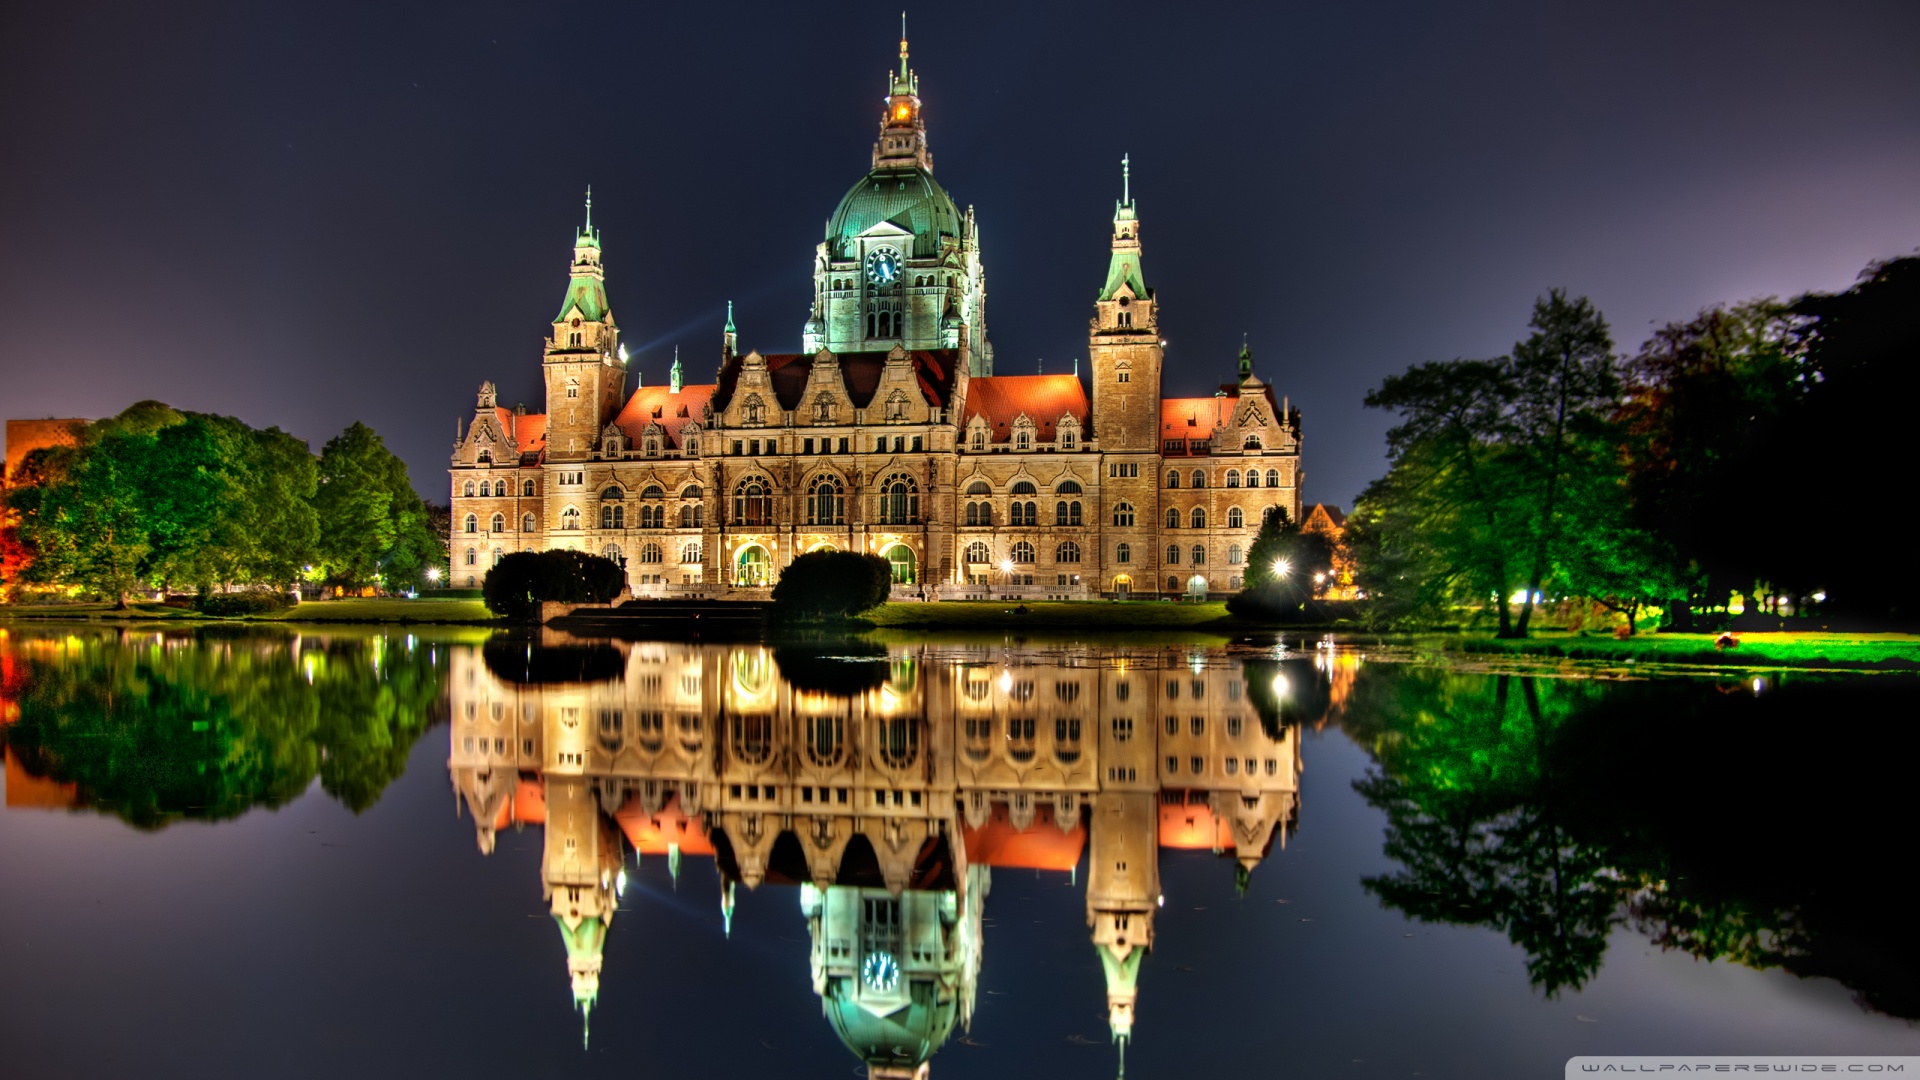 the_new_city_hall_in_hanover_germany-wallpaper-1920x1080.jpg